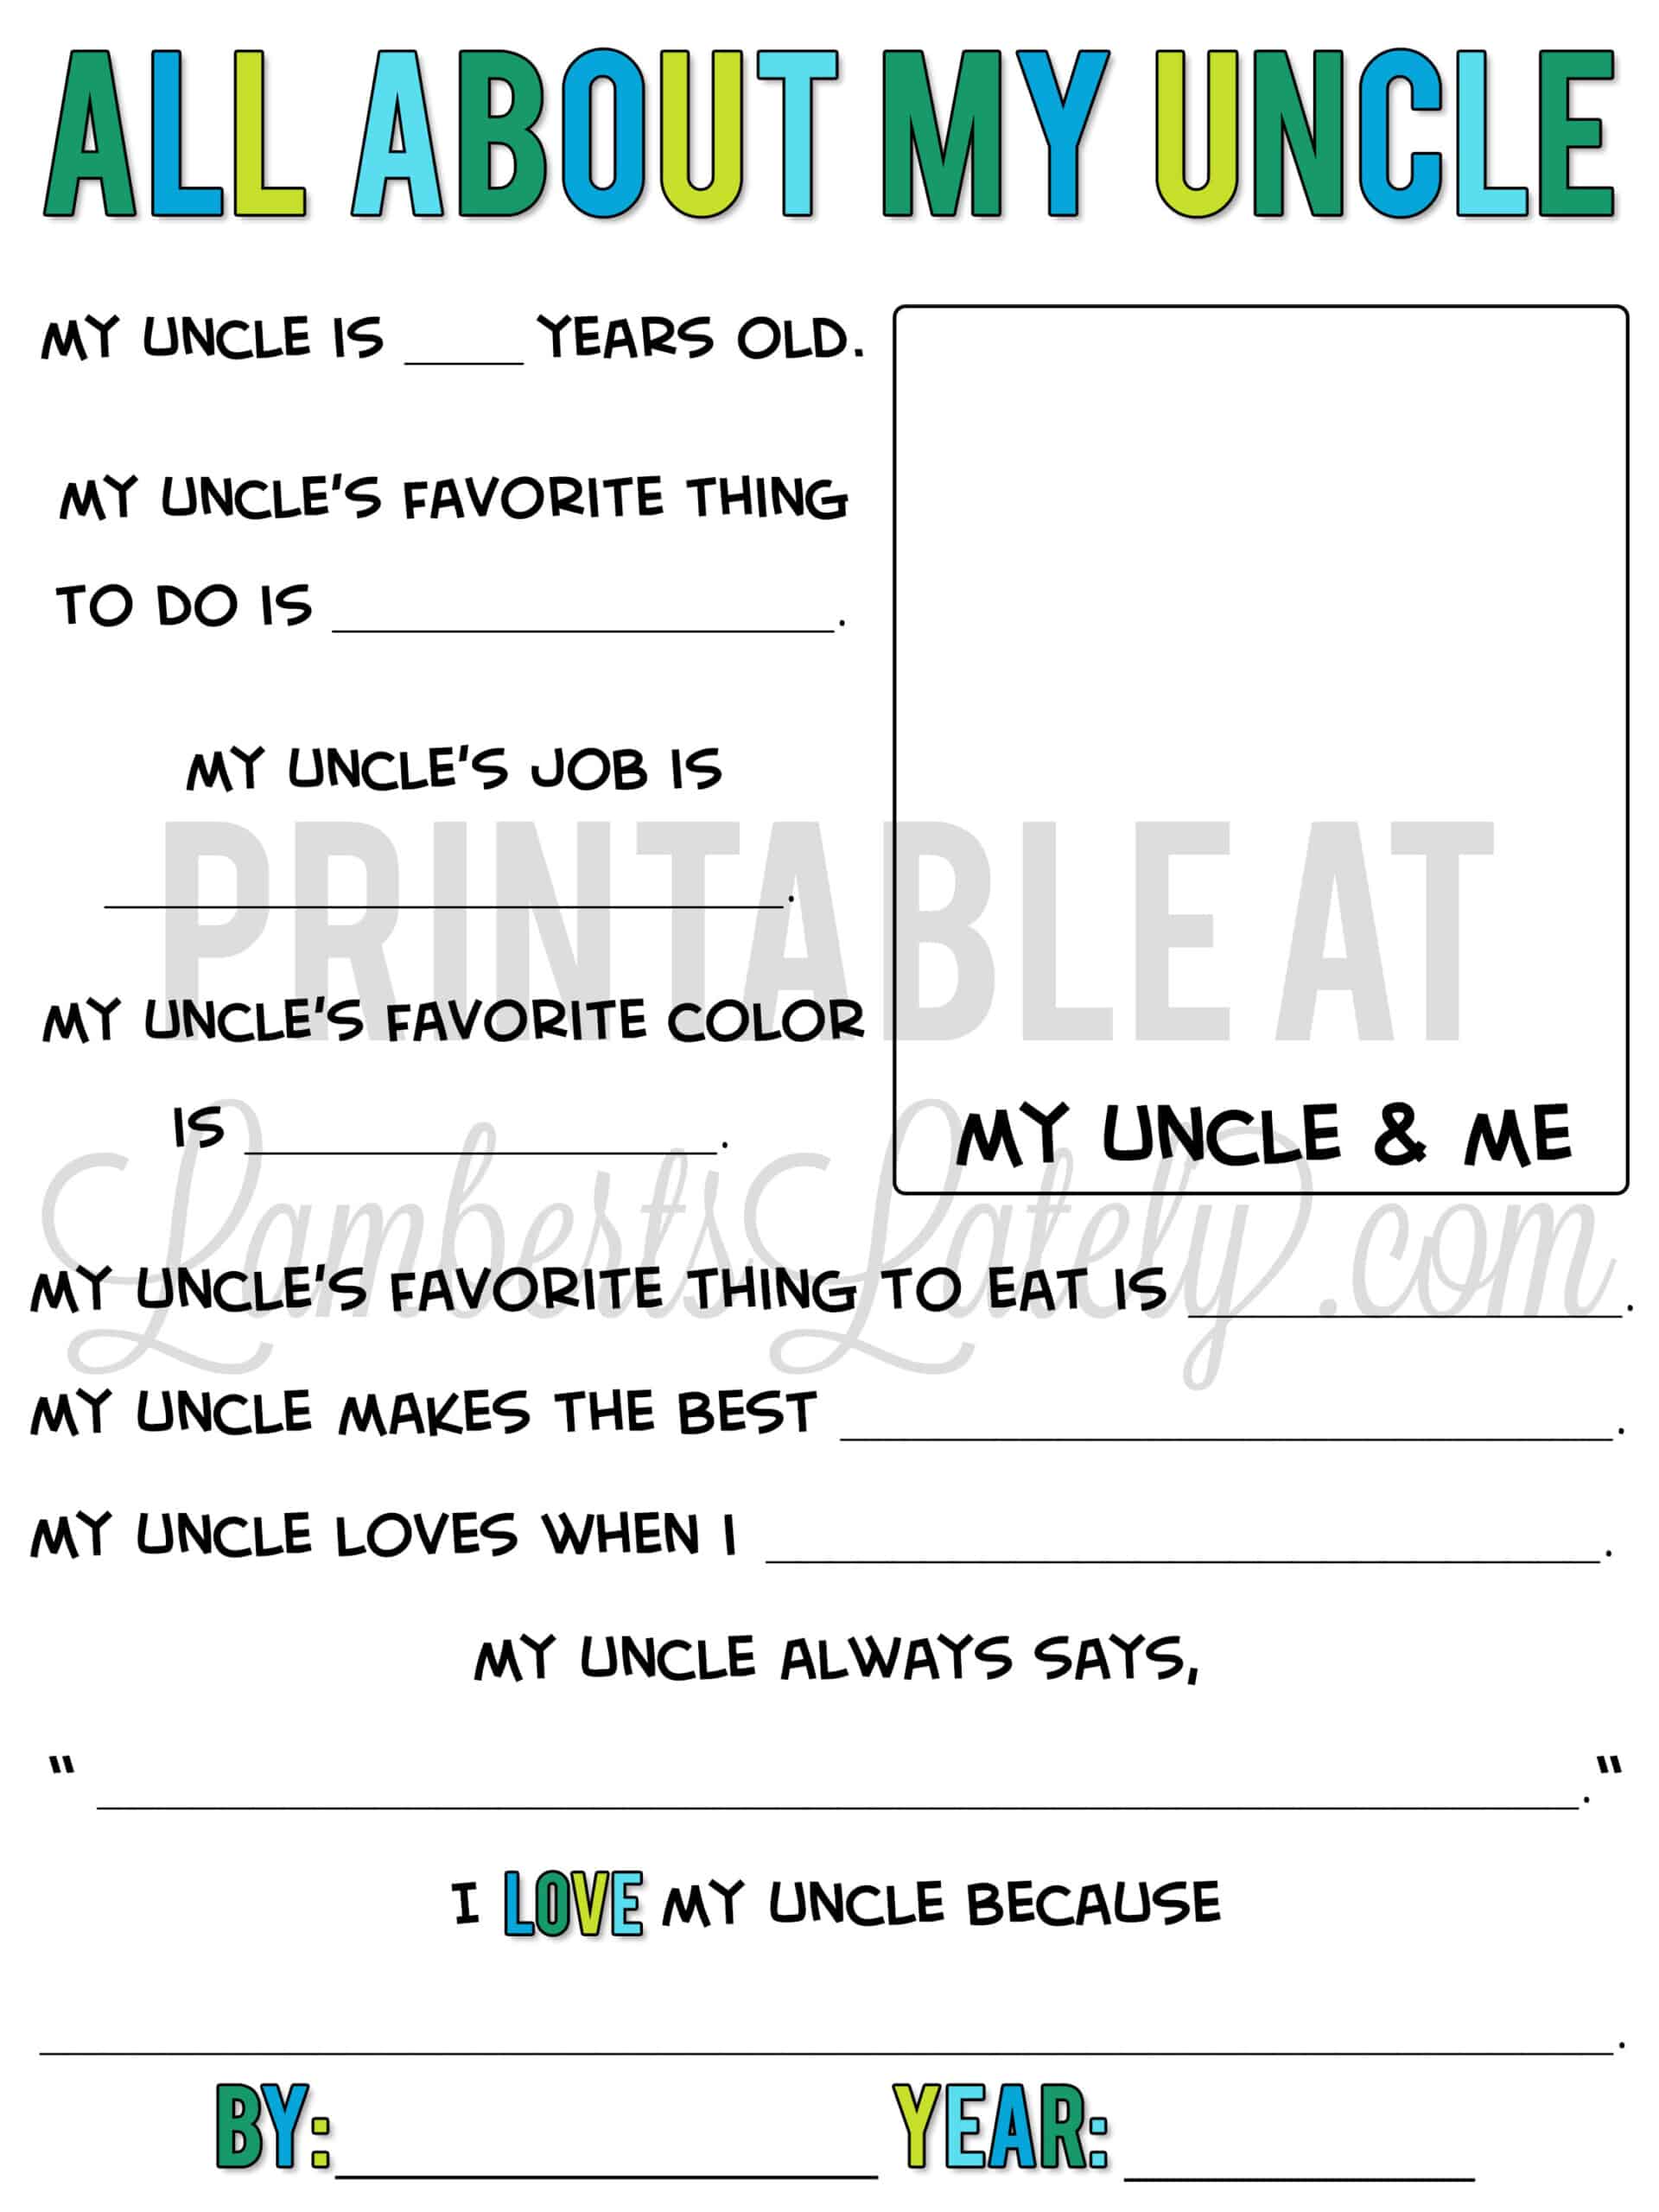 all about my uncle printable.